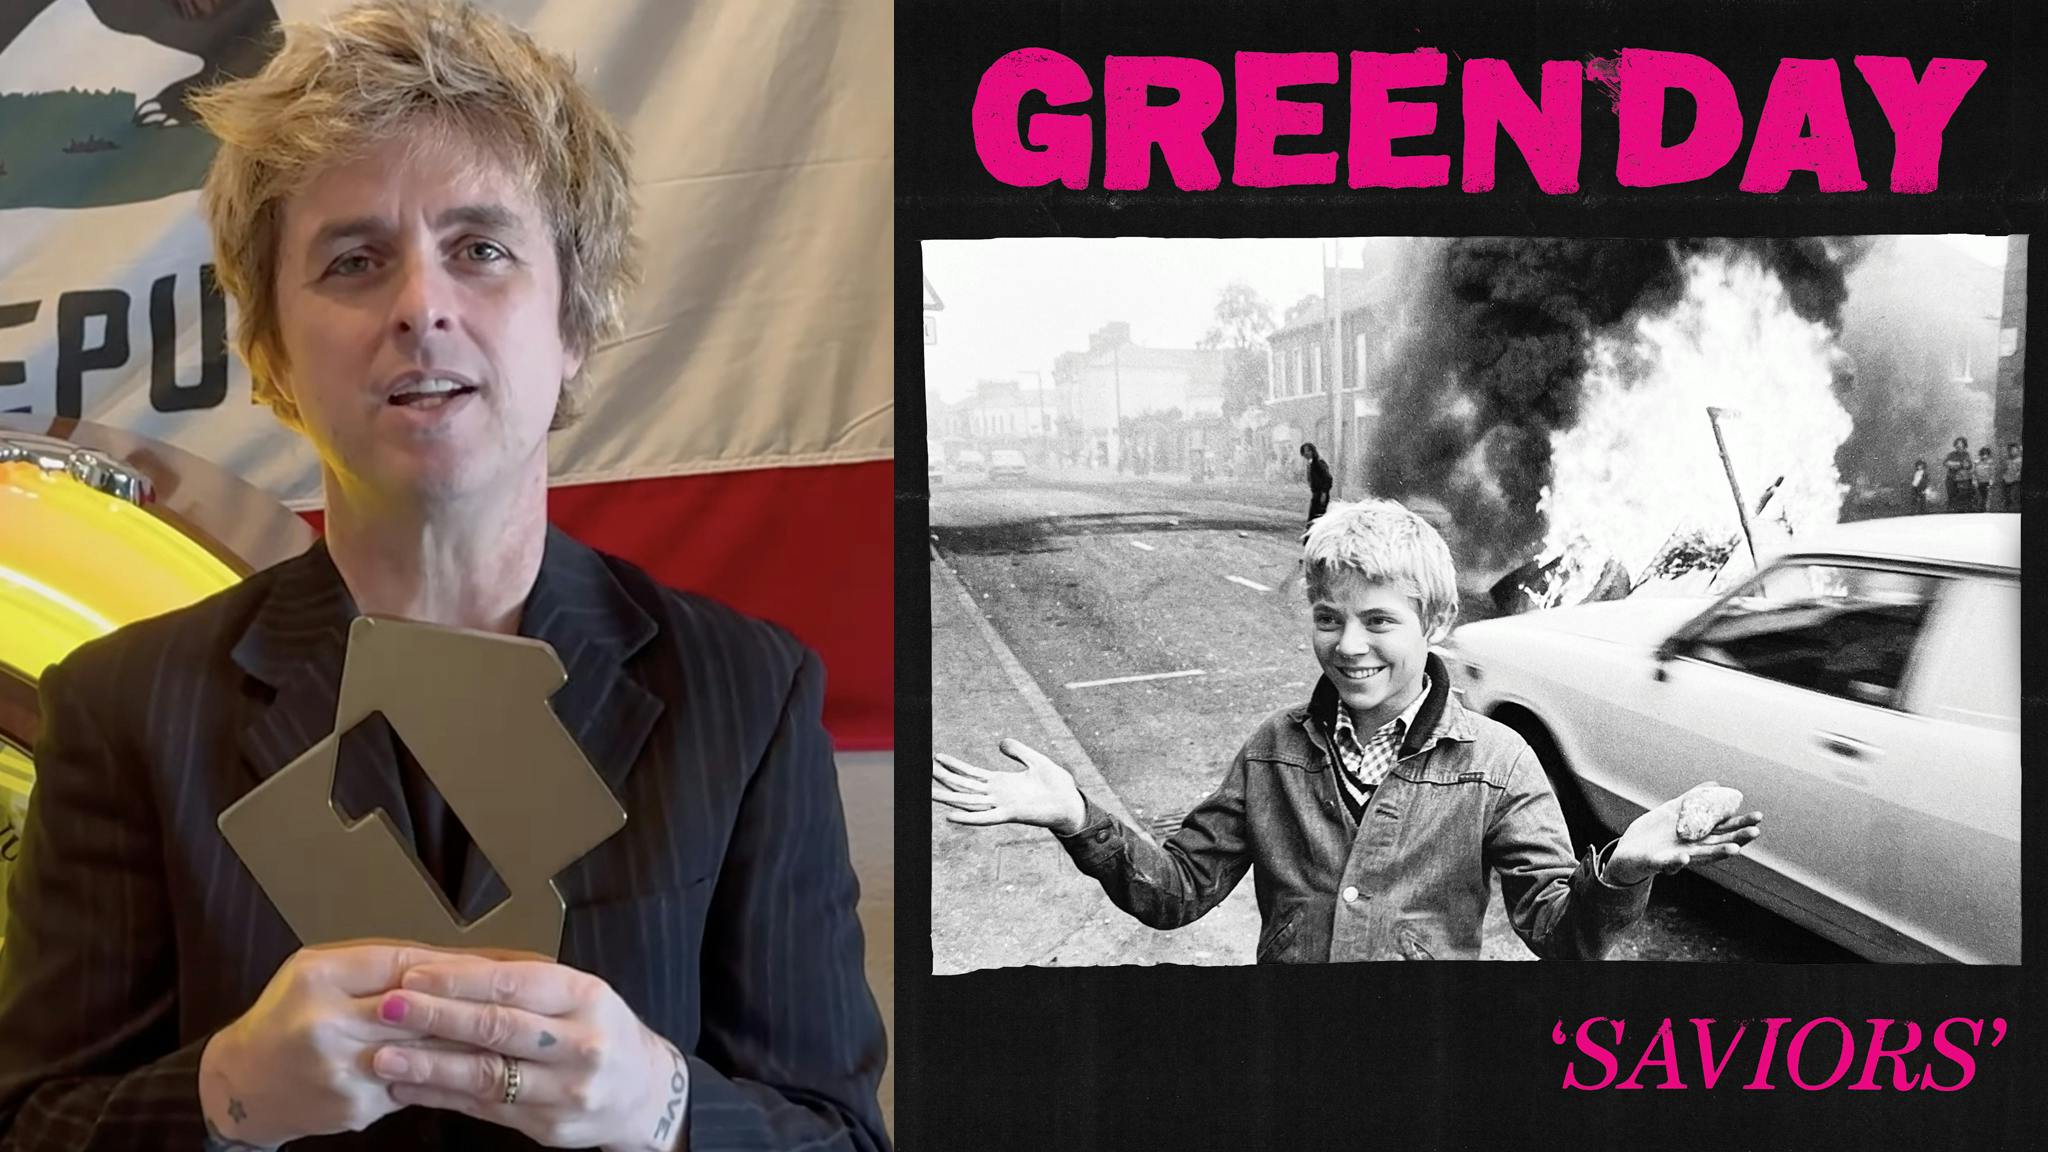 Green Day’s Saviors hits Number One in the UK charts: “We love you all”